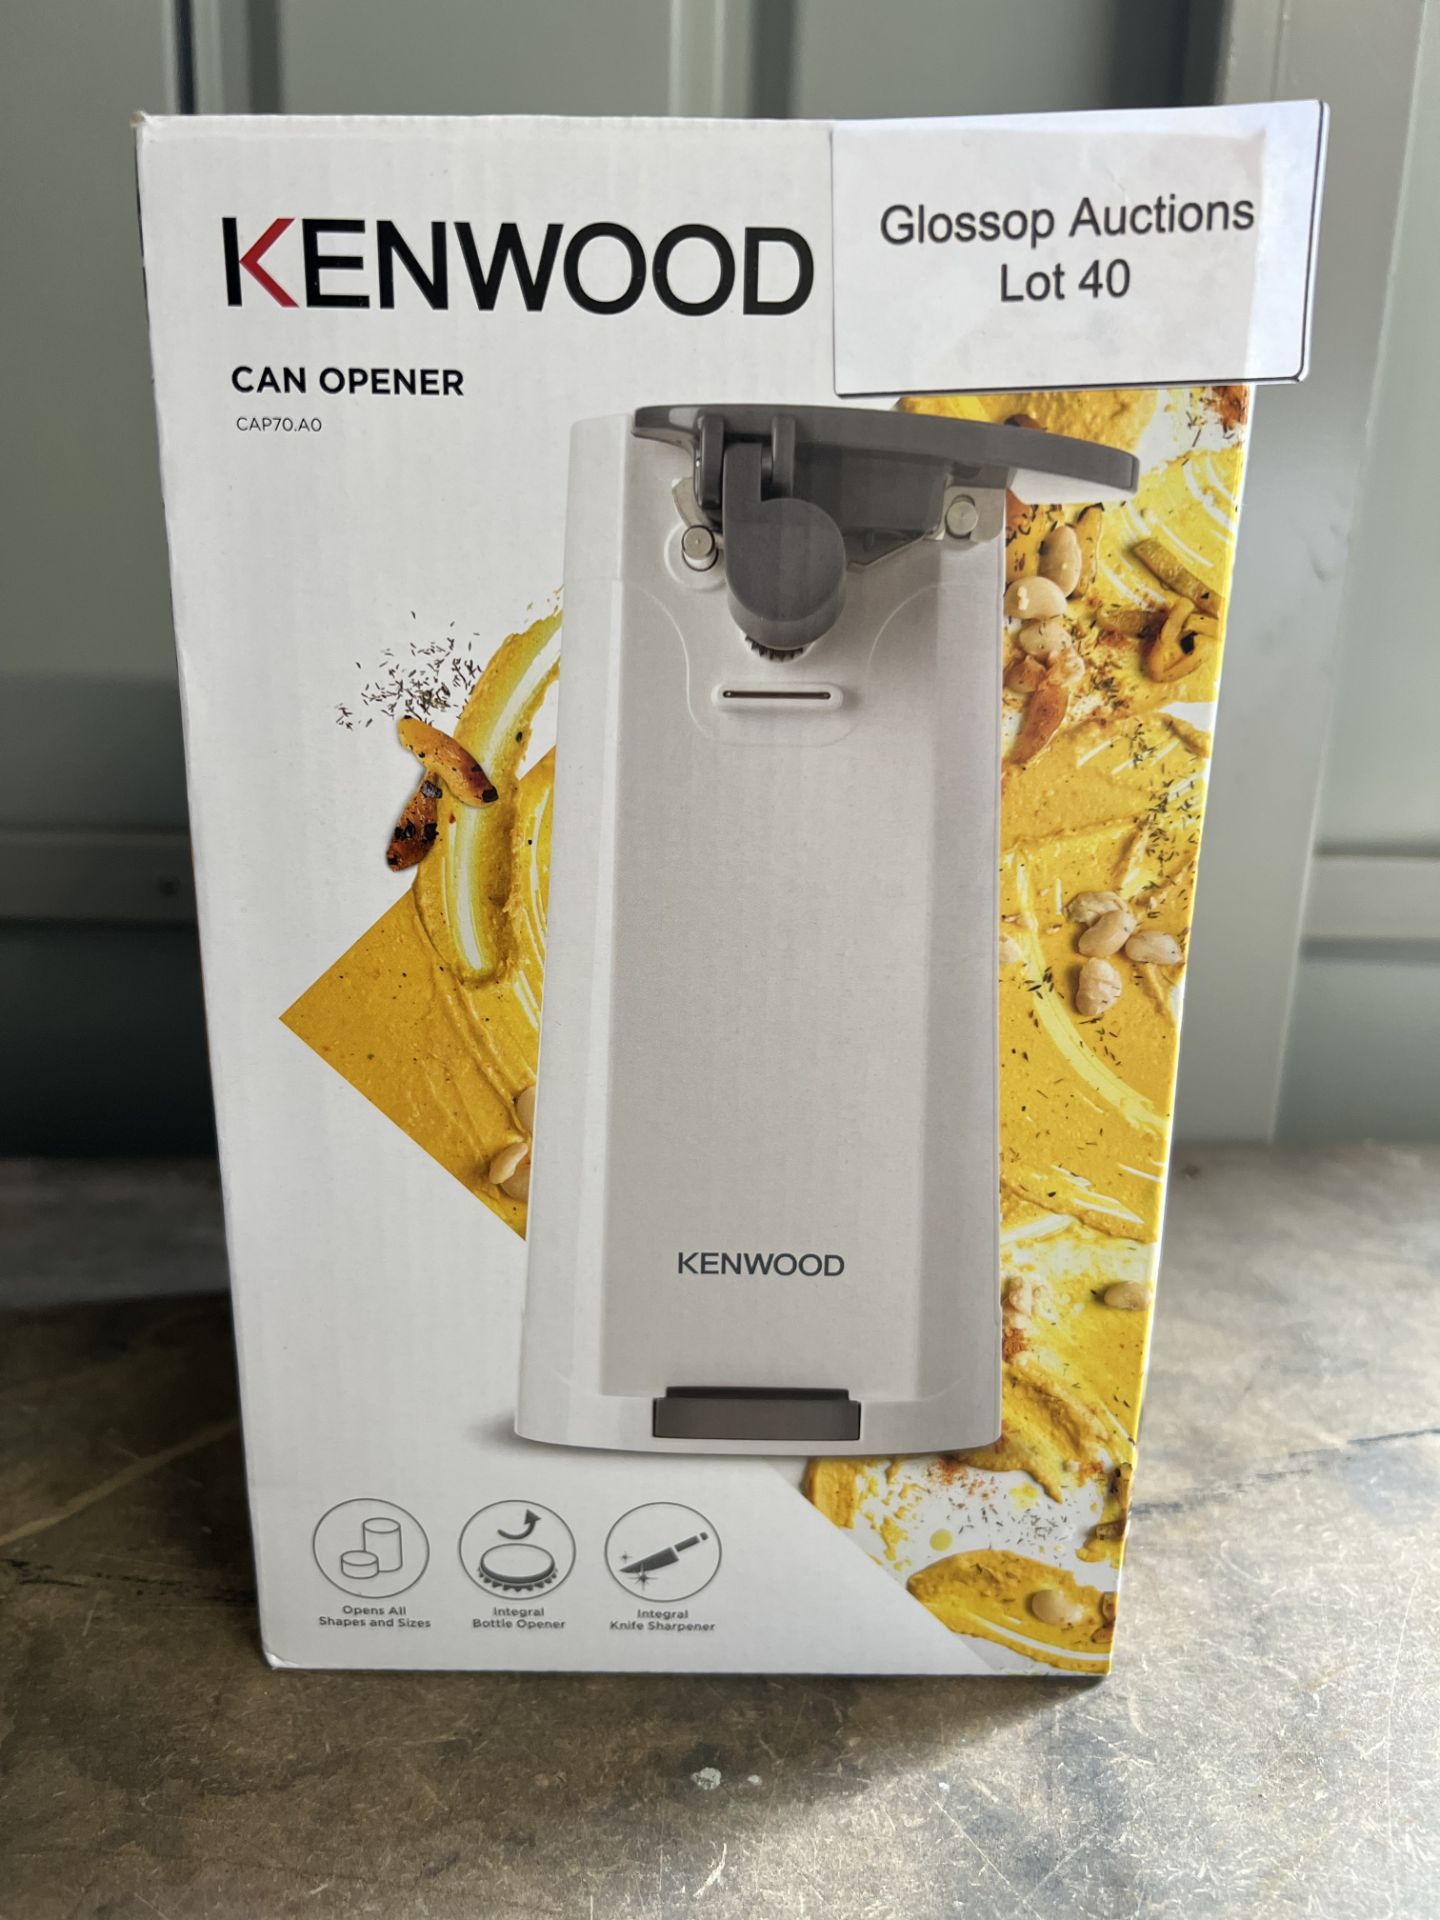 Kenwood Cap70.A0Wh Electric Can Opener, Brilliant White. RRP £23.99 - GRADE U - Image 2 of 2